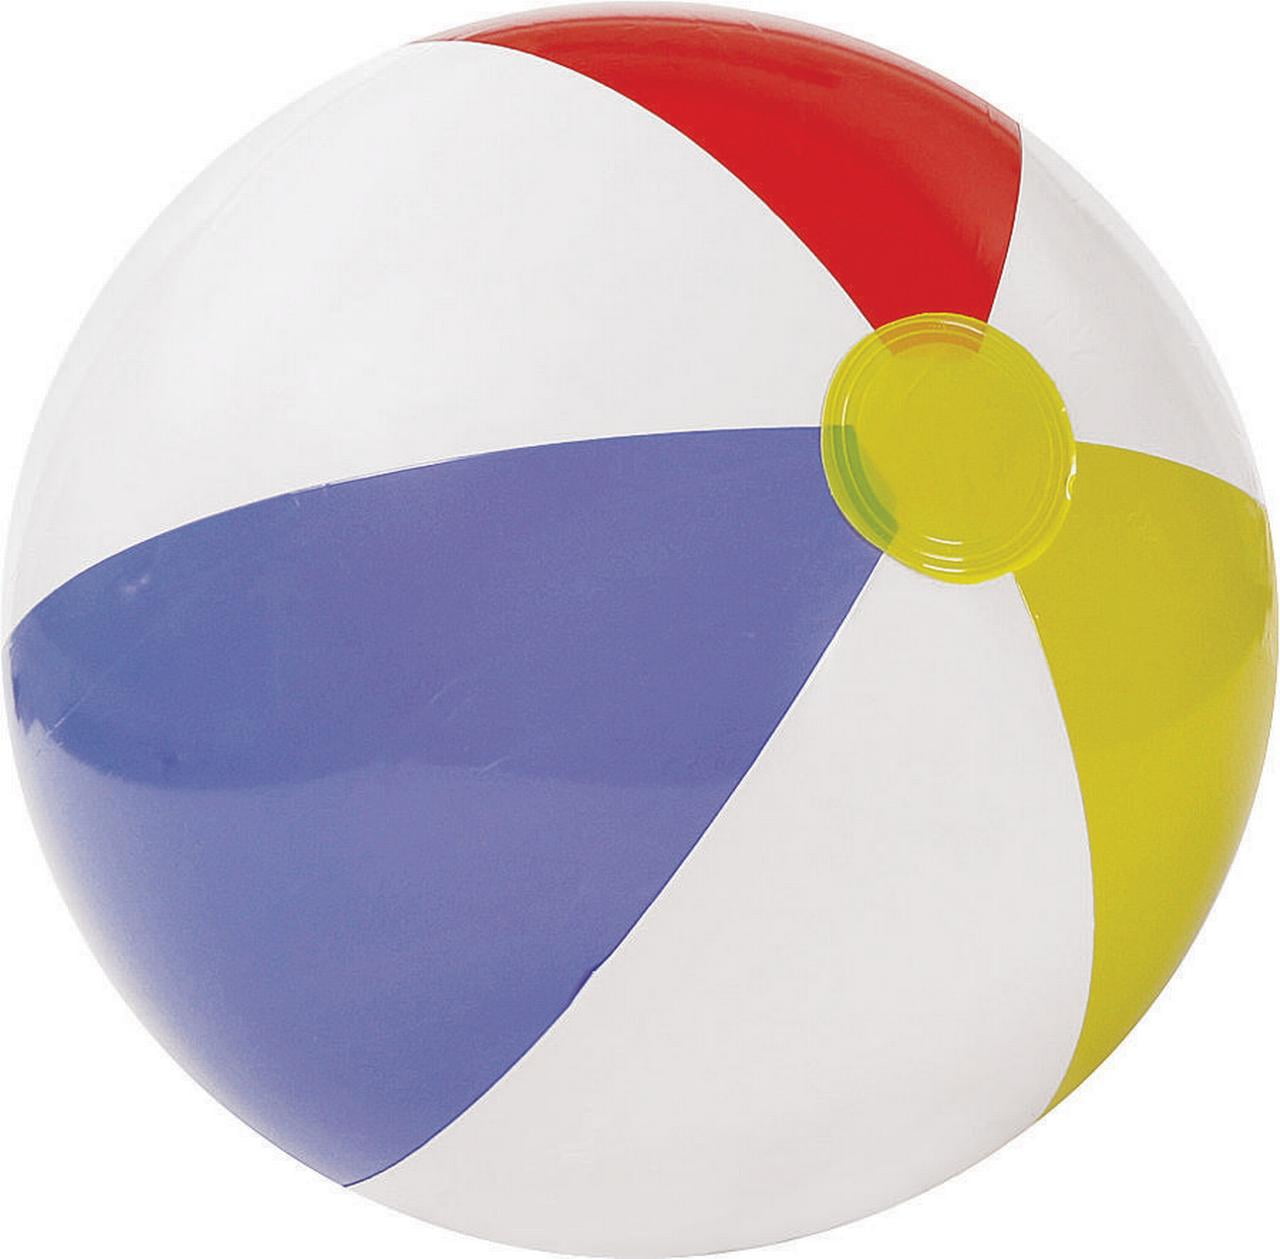 Transparent Patterned 20" Inflatable Beach Ball Pool Party Blowup Kids Toys 1Pcs 